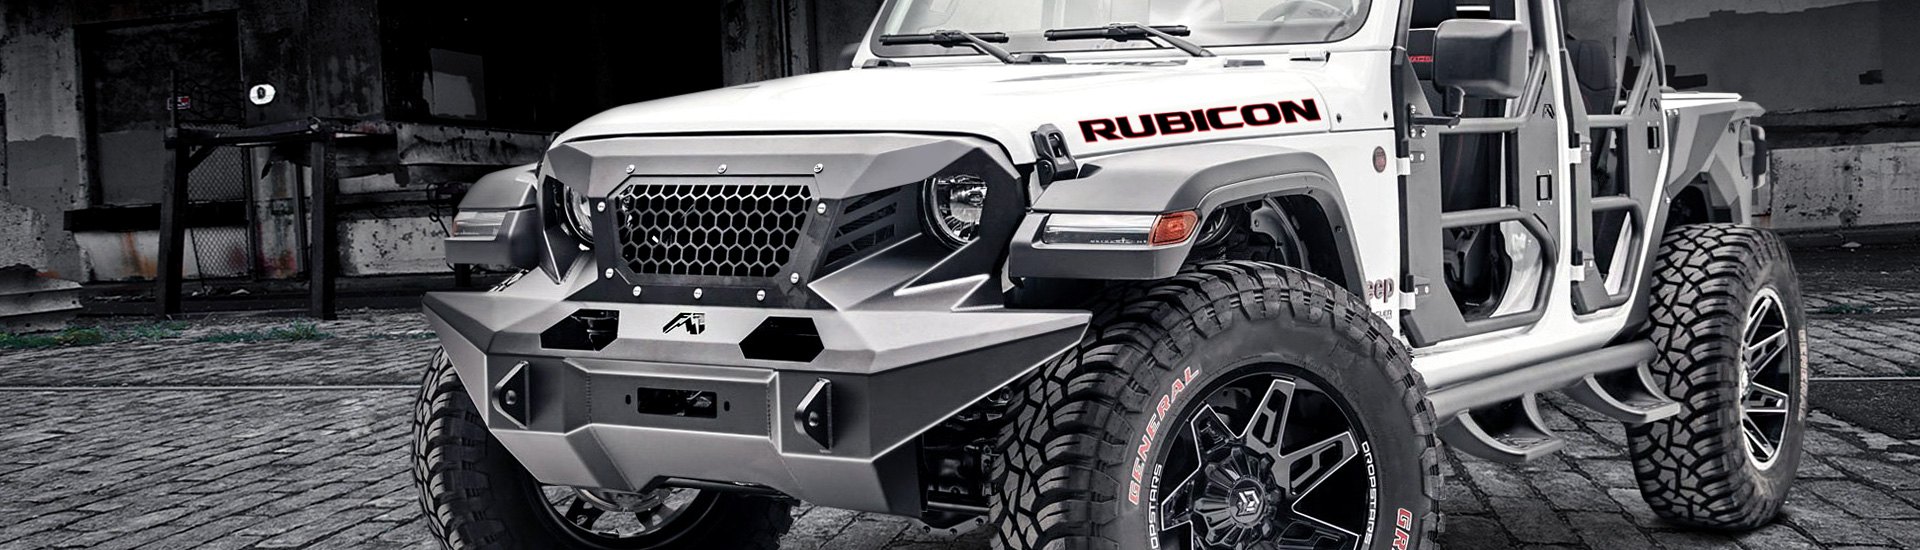 Grumper Full Width Front HD Bumper by Fab Fours is now Available for JL  Wrangler